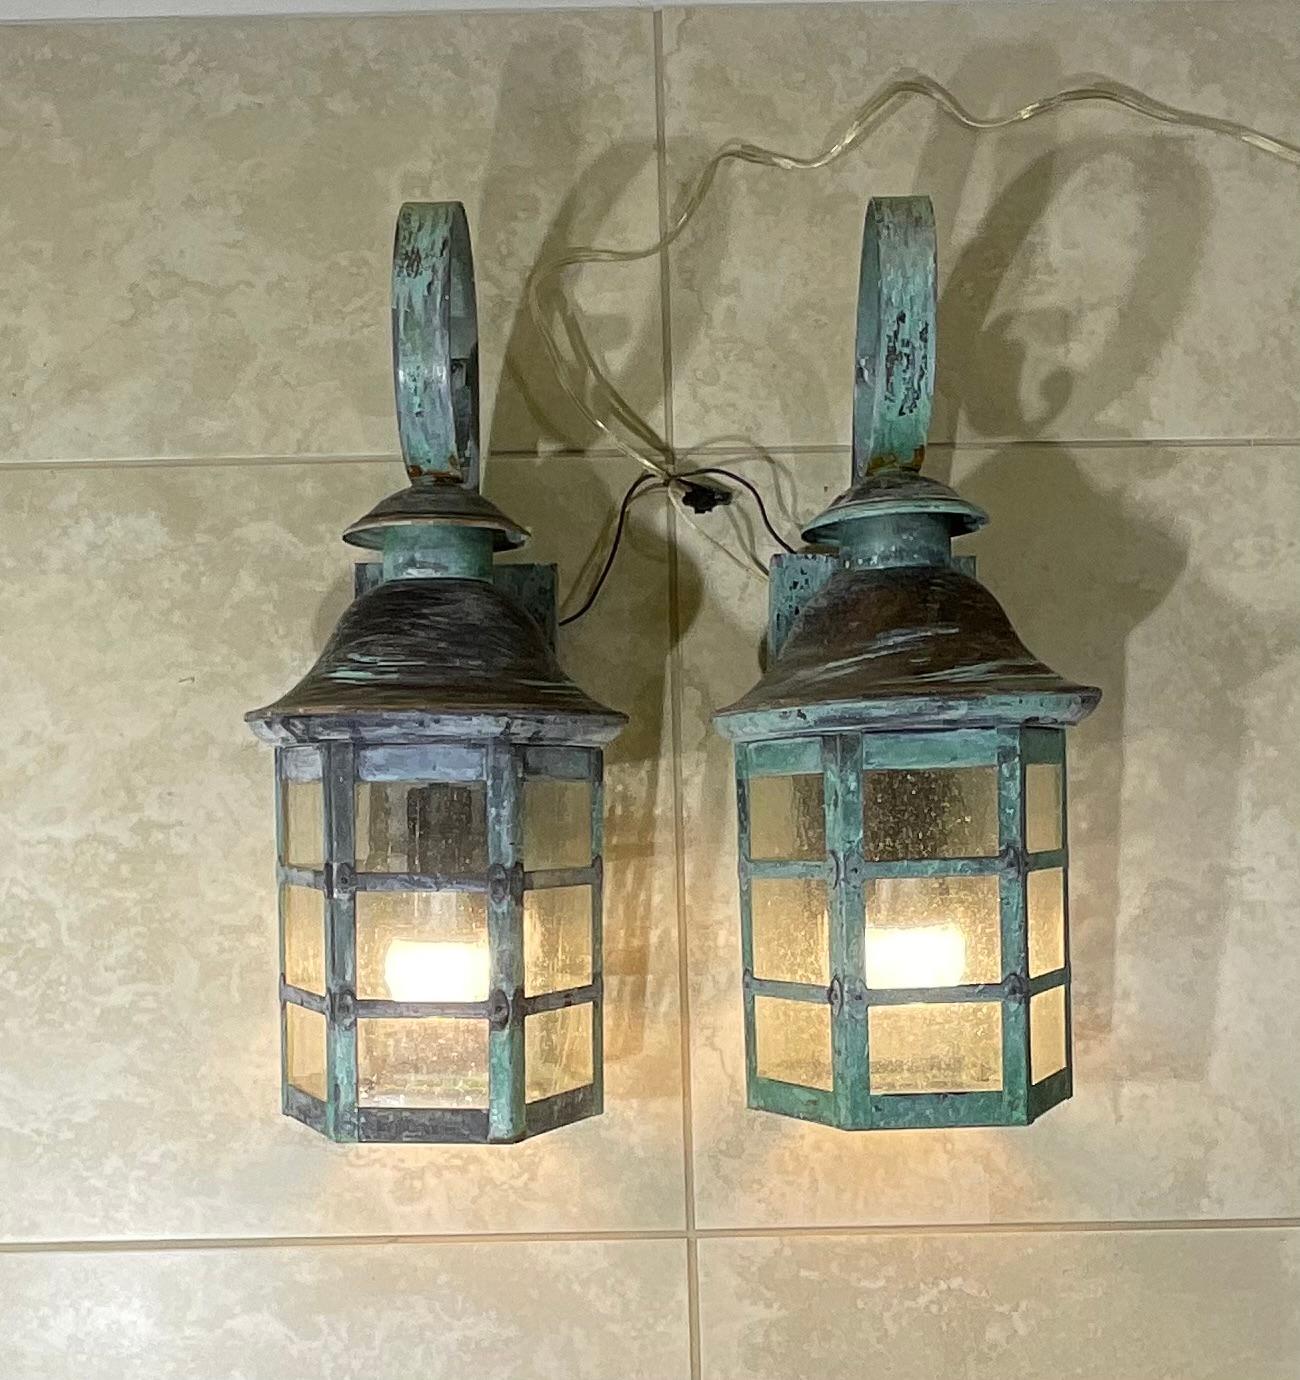 Elegant pair of wall hanging lantern hand forged with solid brass and copper beautiful patina, seeded glass. Electrified with one 60/watt light each, suitable for wet locations.
Great decorative pair of lantern.